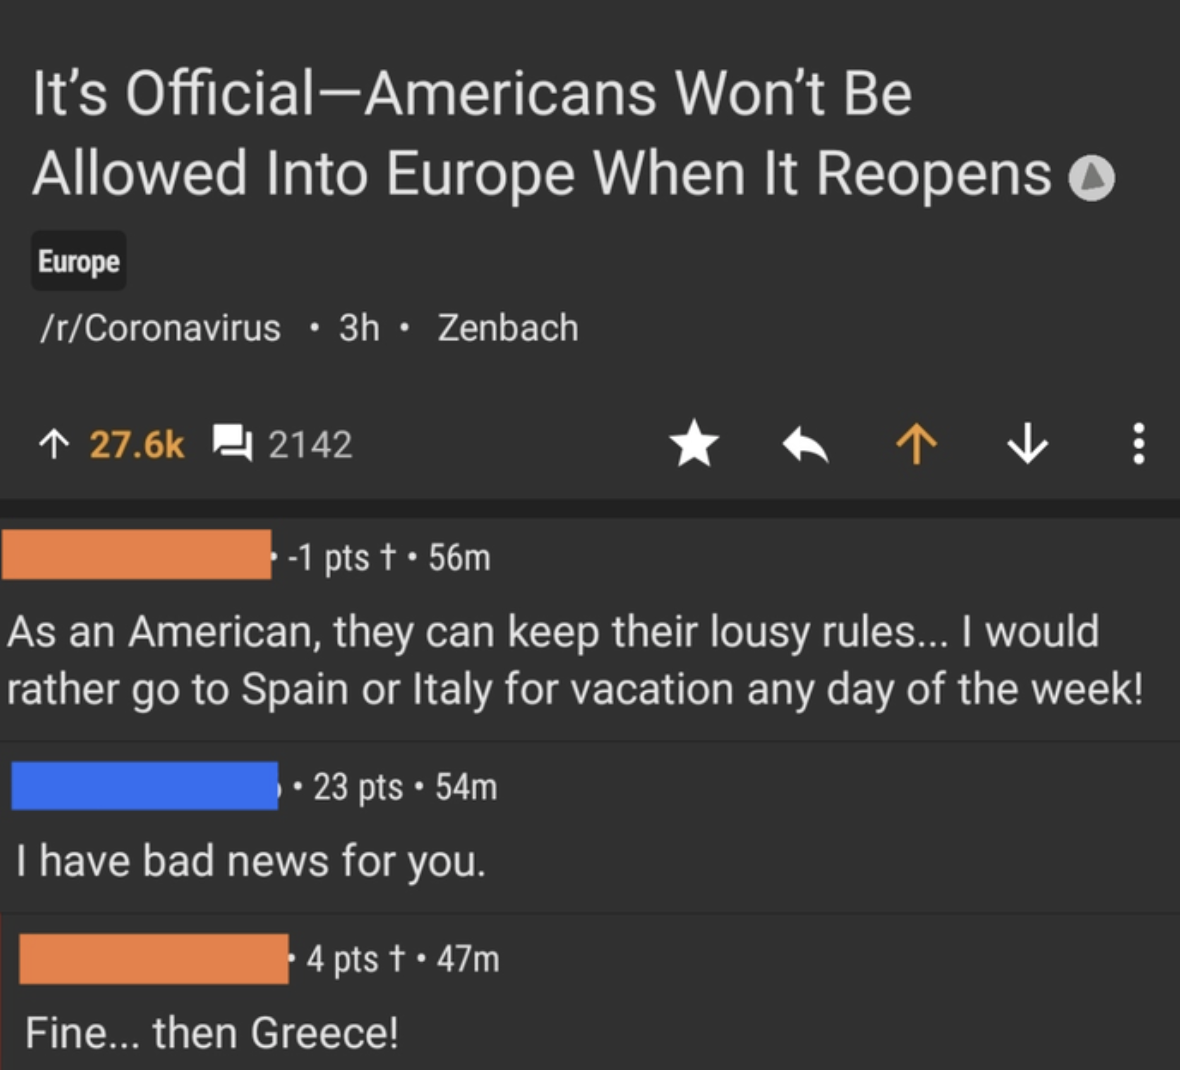 reddit post about americans being barred from other coutries with the text as an american they can keep their lousy rules i would rather go to spain or italy any day of the week